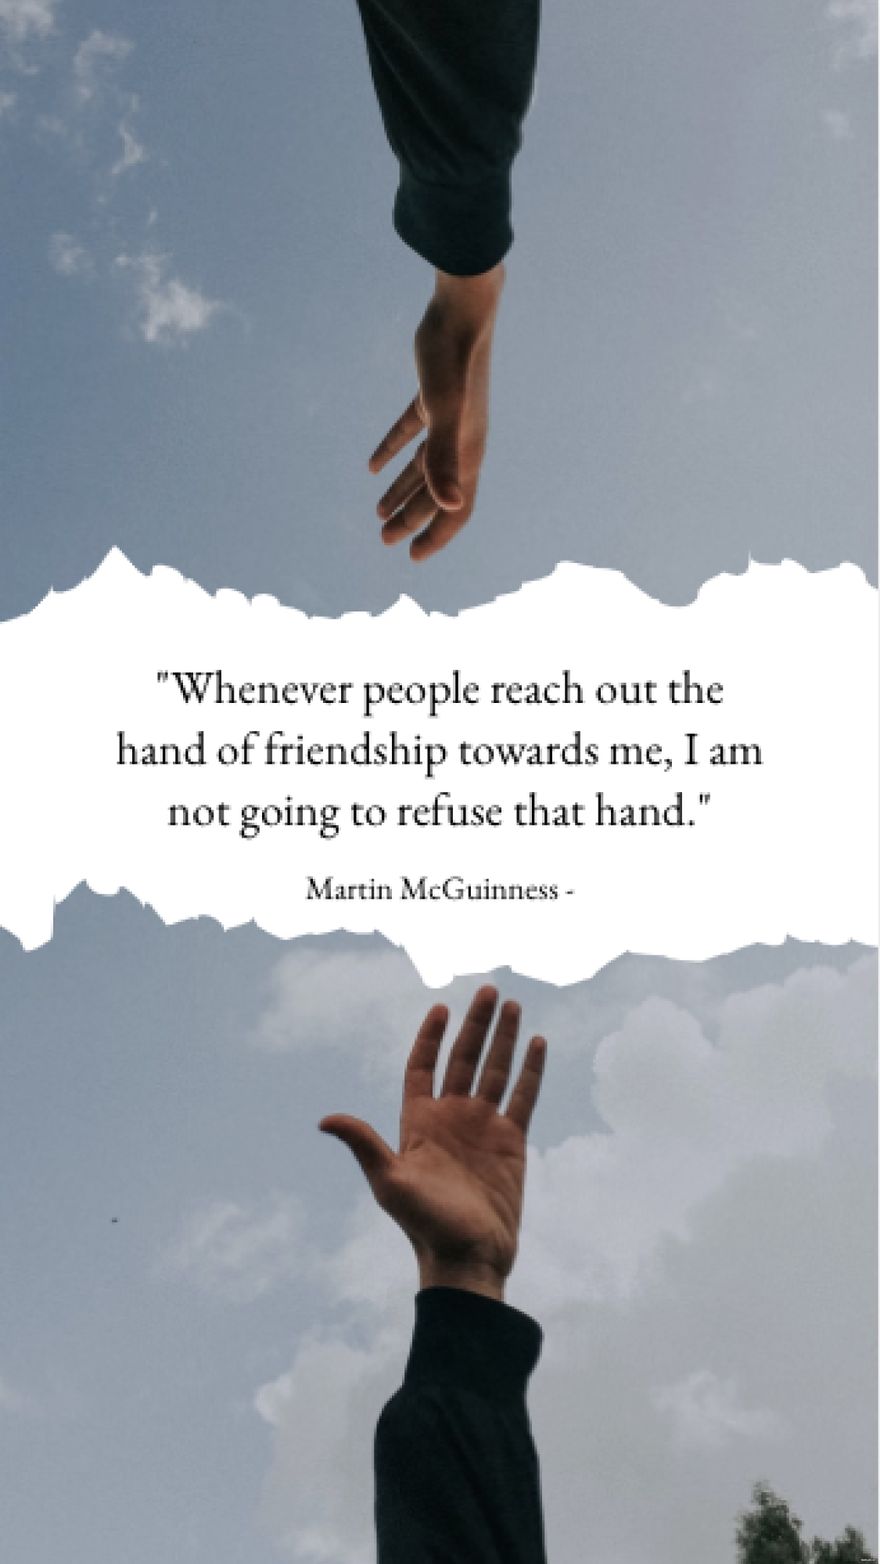 Free Martin McGuinness - Whenever people reach out the hand of friendship towards me, I am not going to refuse that hand. in JPG